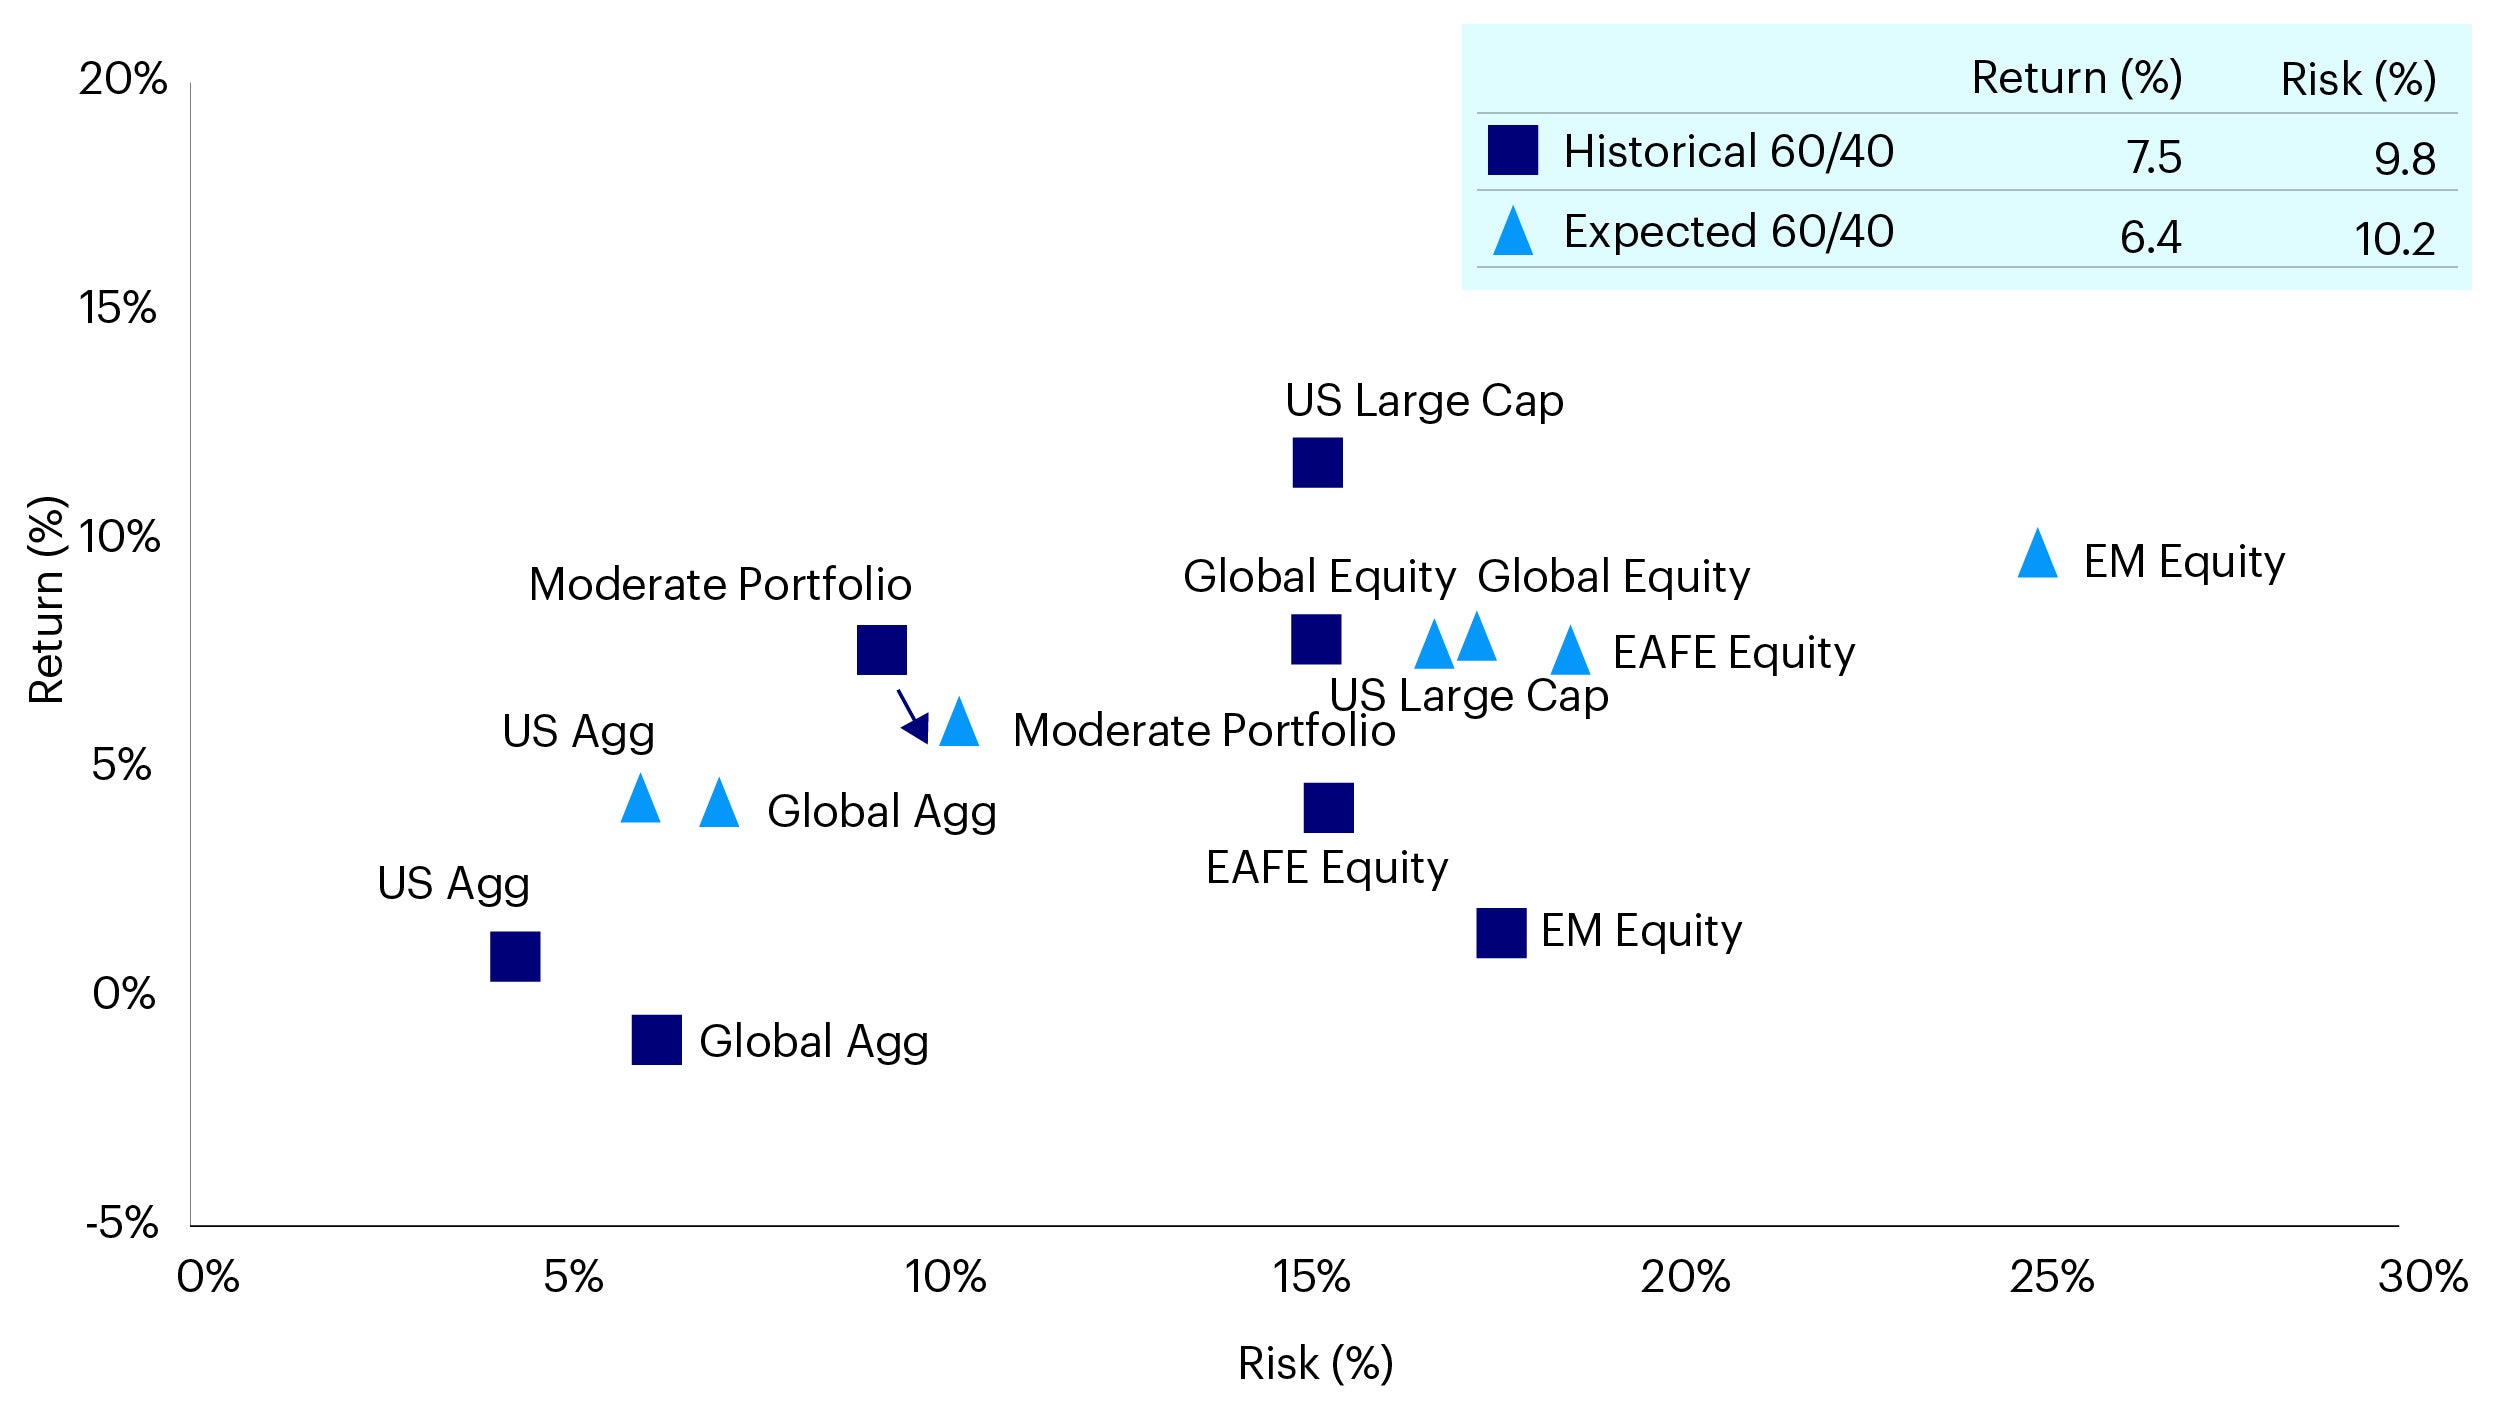 Figure 1 - Significant drop in expected return for traditional 60/40 portfolios amid increased risk (USD)